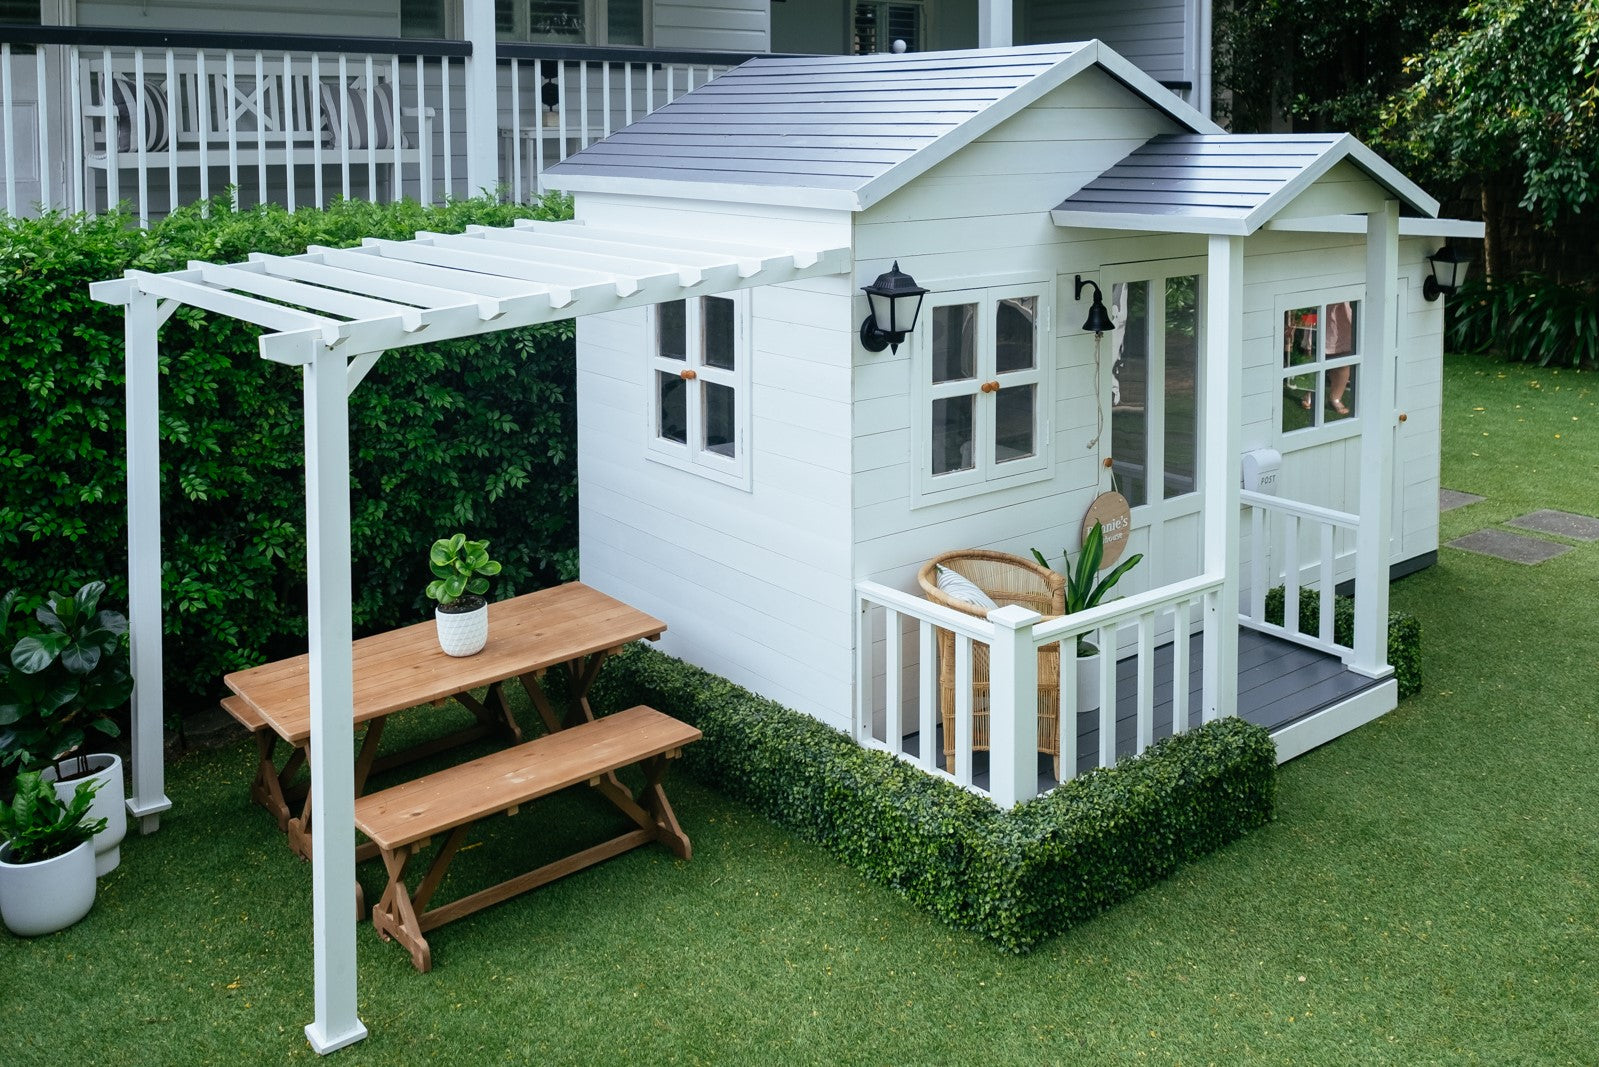 Kids outdoor timber table and bench seat set sit under cubby house pergola